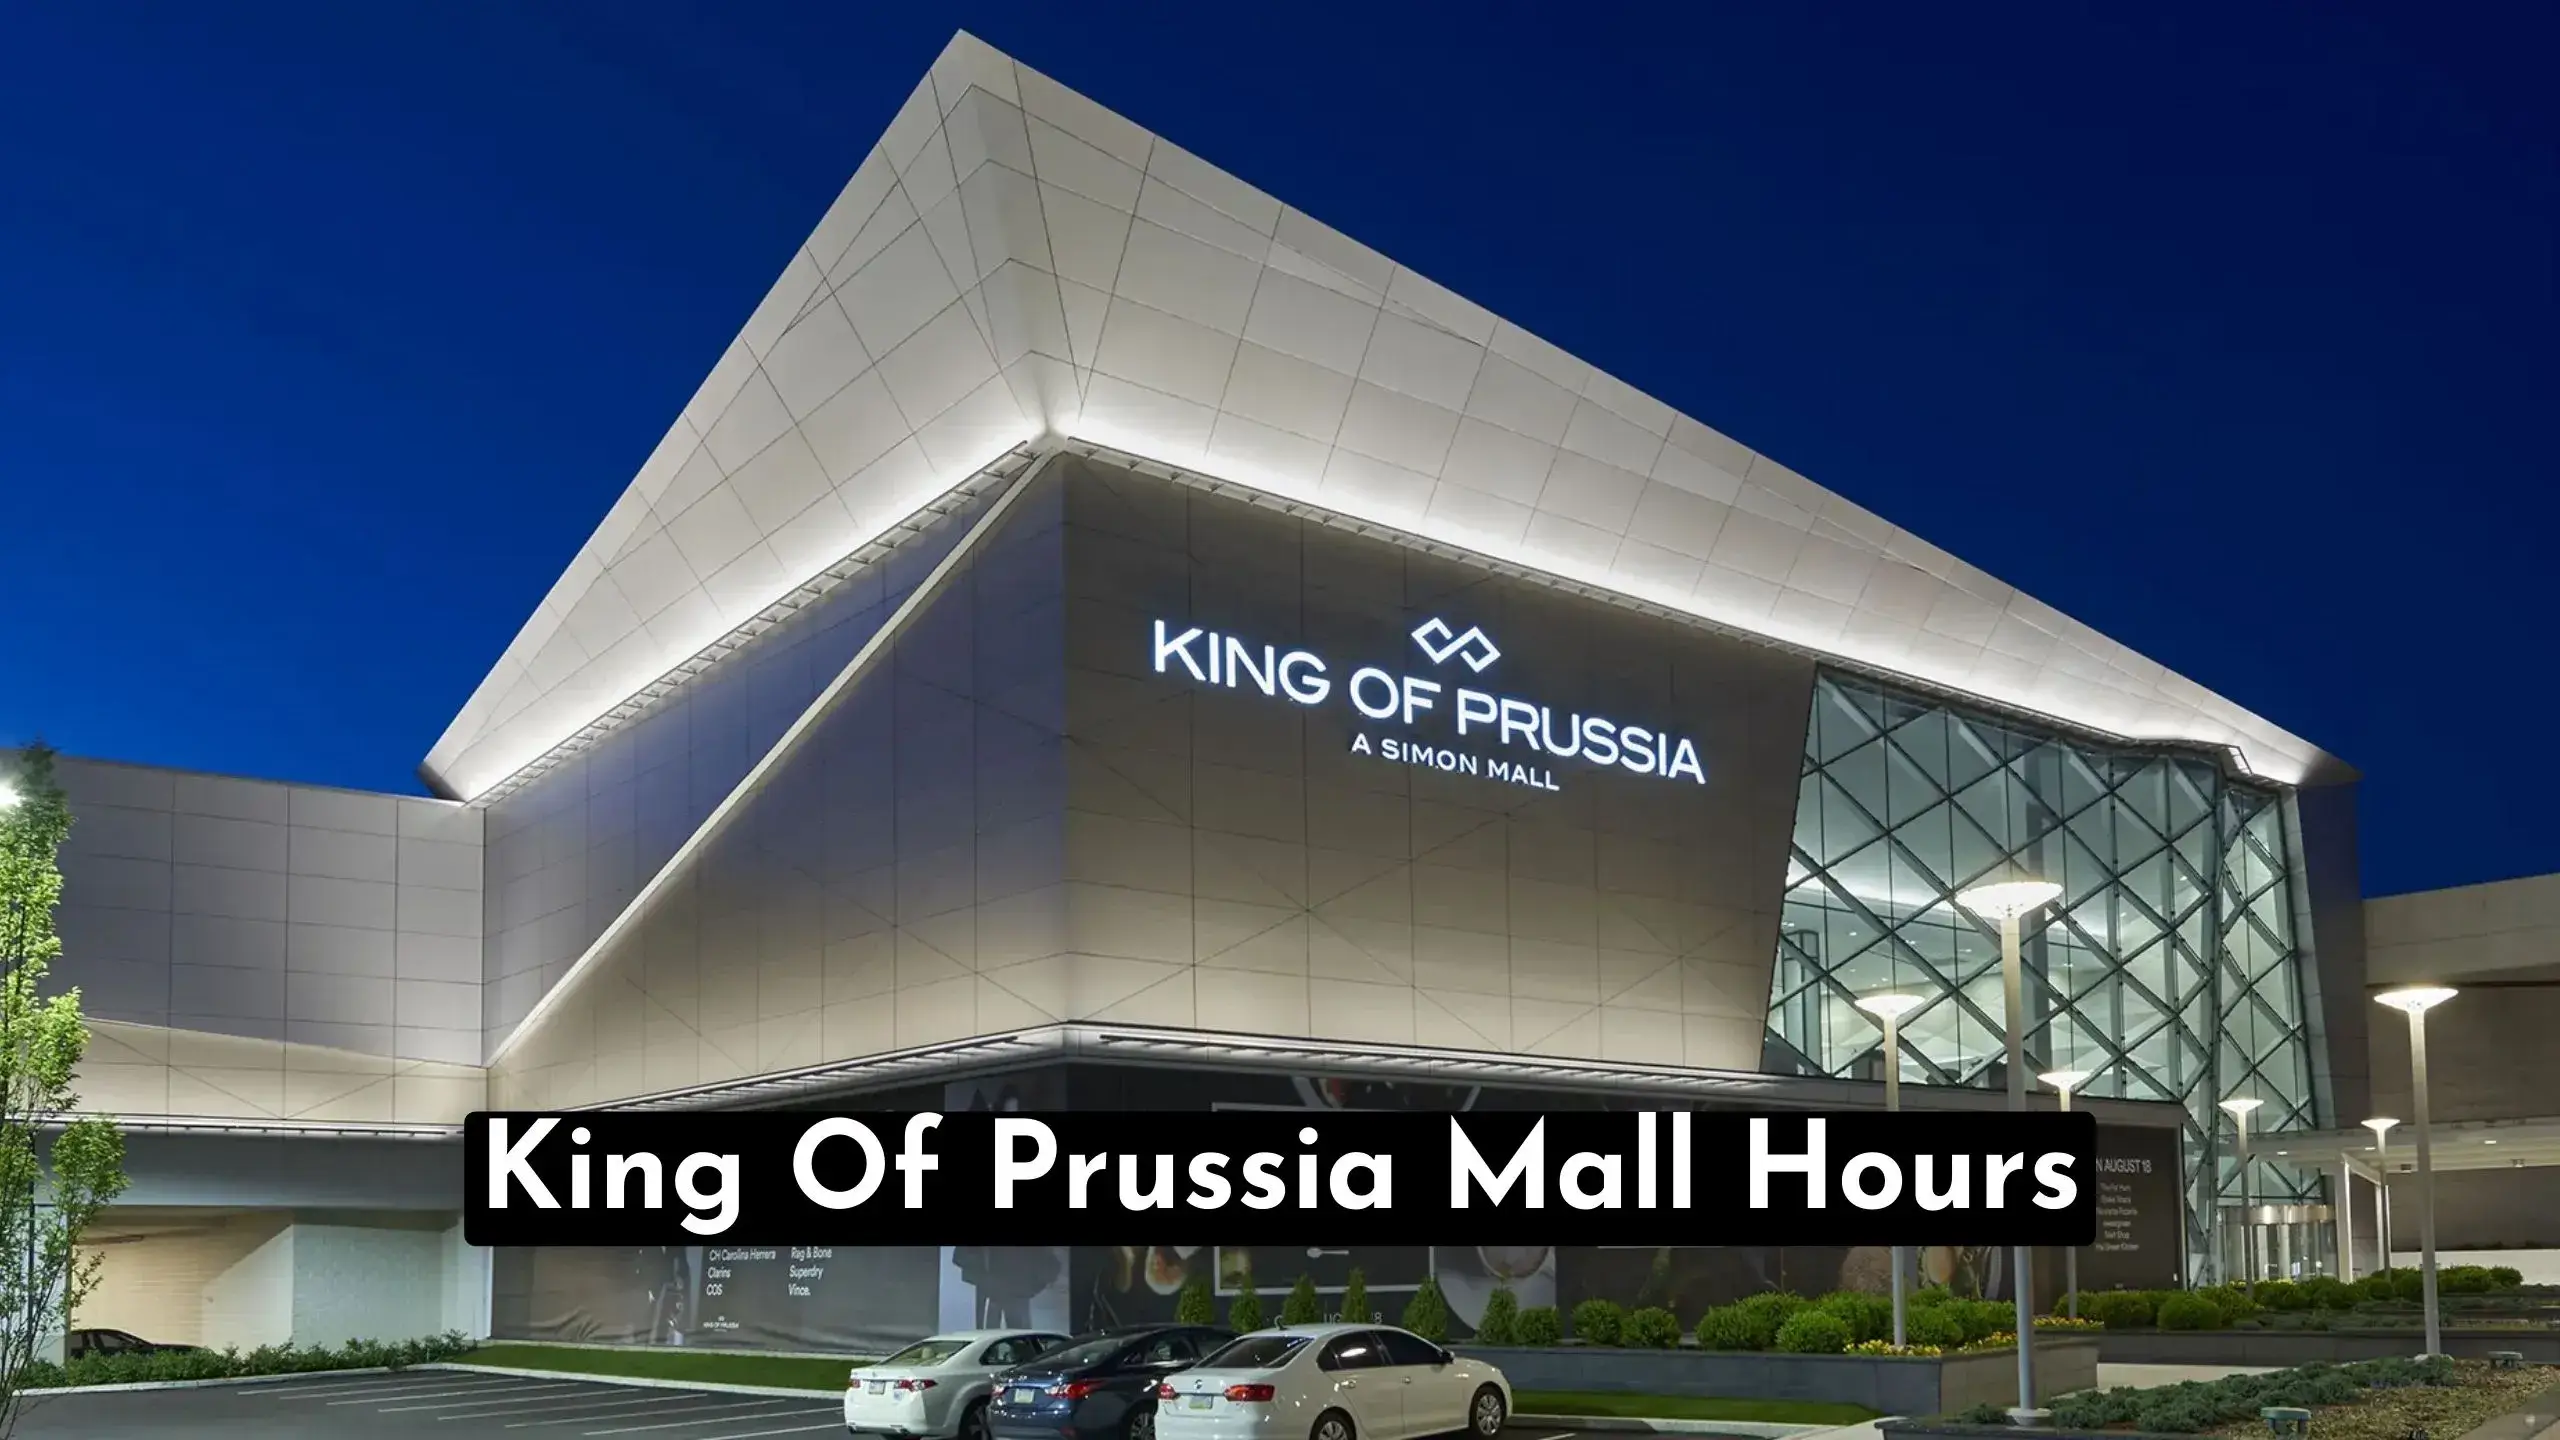 Explore King of Prussia Mall Hours- East Coast's Top Shopping Haven with 400+ Stores. Extended Hours & Endless Attractions Await in 2023